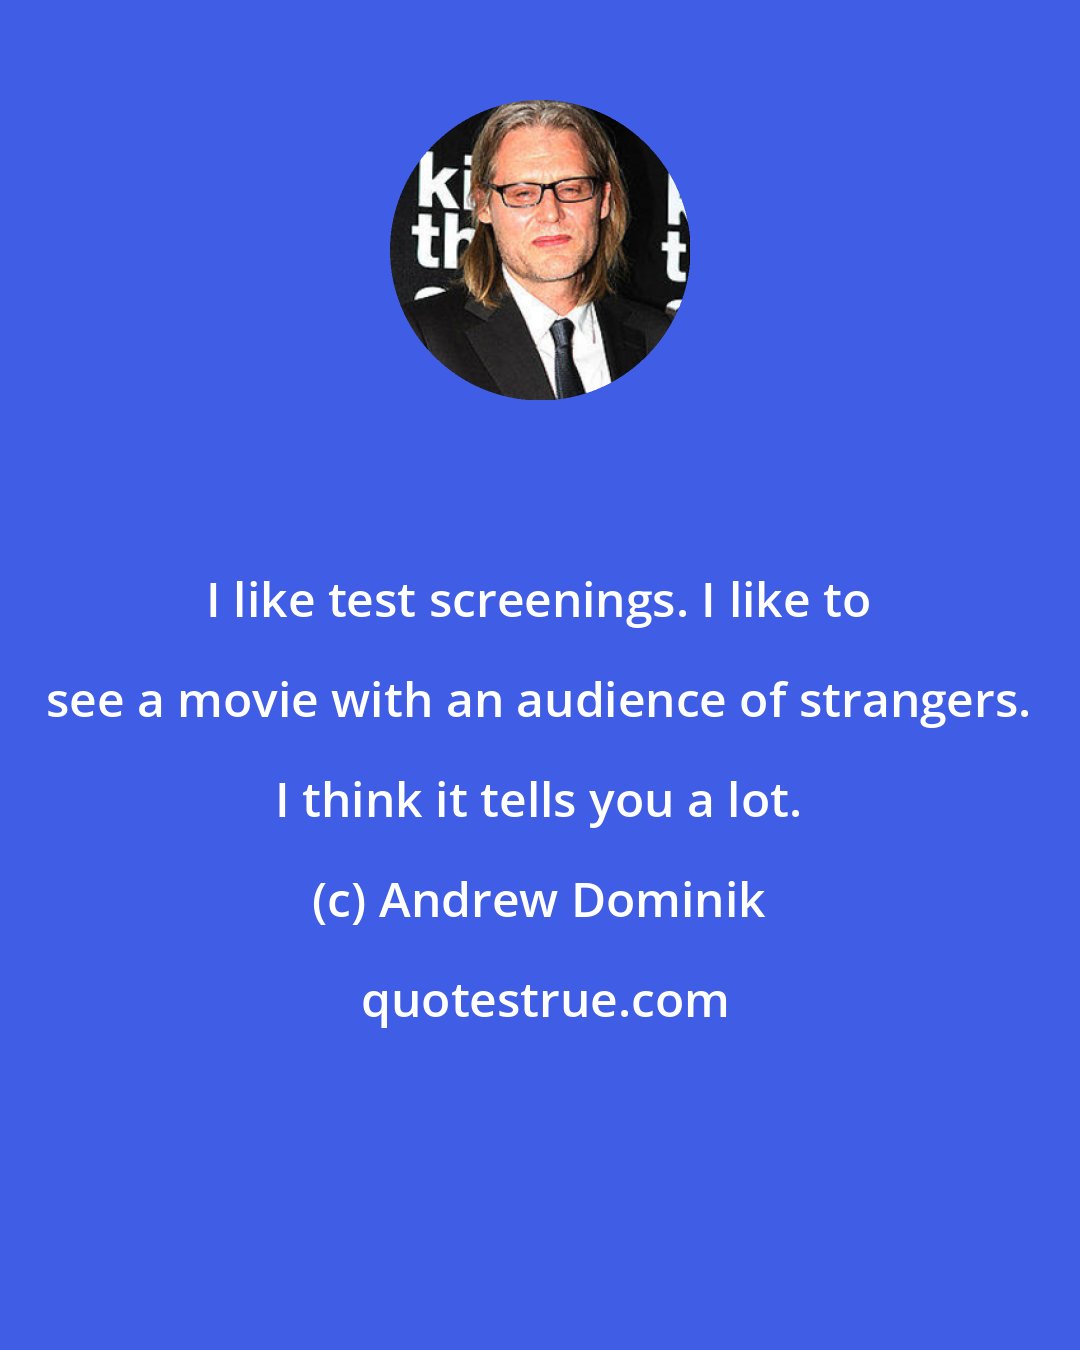 Andrew Dominik: I like test screenings. I like to see a movie with an audience of strangers. I think it tells you a lot.